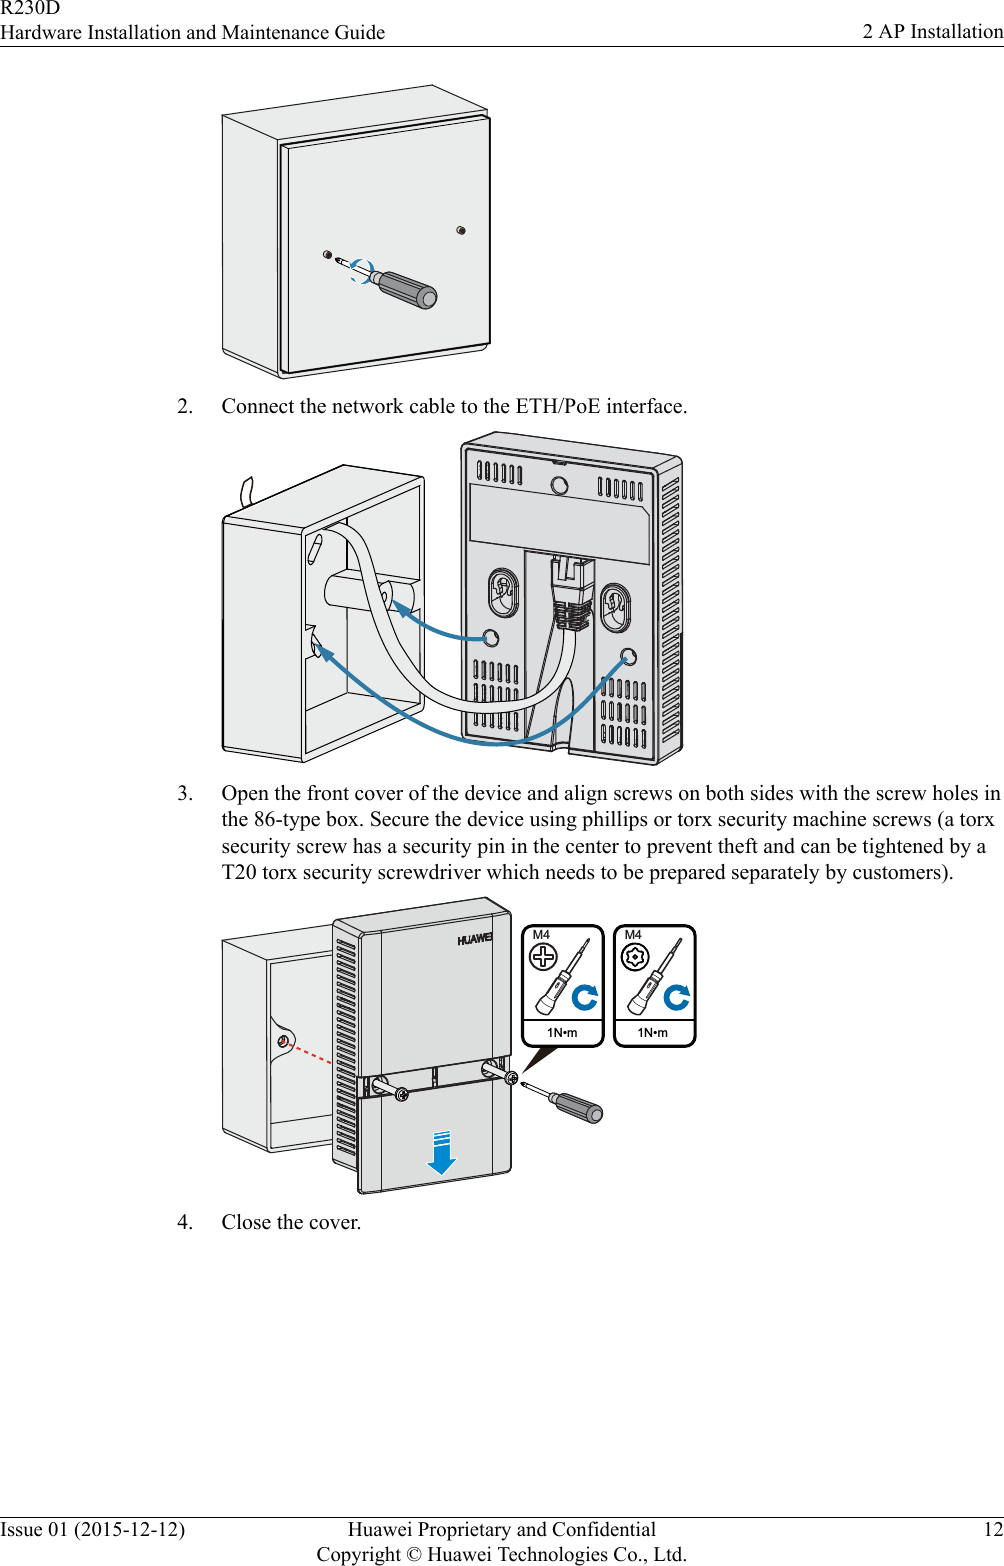 2. Connect the network cable to the ETH/PoE interface.3. Open the front cover of the device and align screws on both sides with the screw holes inthe 86-type box. Secure the device using phillips or torx security machine screws (a torxsecurity screw has a security pin in the center to prevent theft and can be tightened by aT20 torx security screwdriver which needs to be prepared separately by customers). 1N•mM41N•mM44. Close the cover.R230DHardware Installation and Maintenance Guide 2 AP InstallationIssue 01 (2015-12-12) Huawei Proprietary and ConfidentialCopyright © Huawei Technologies Co., Ltd.12